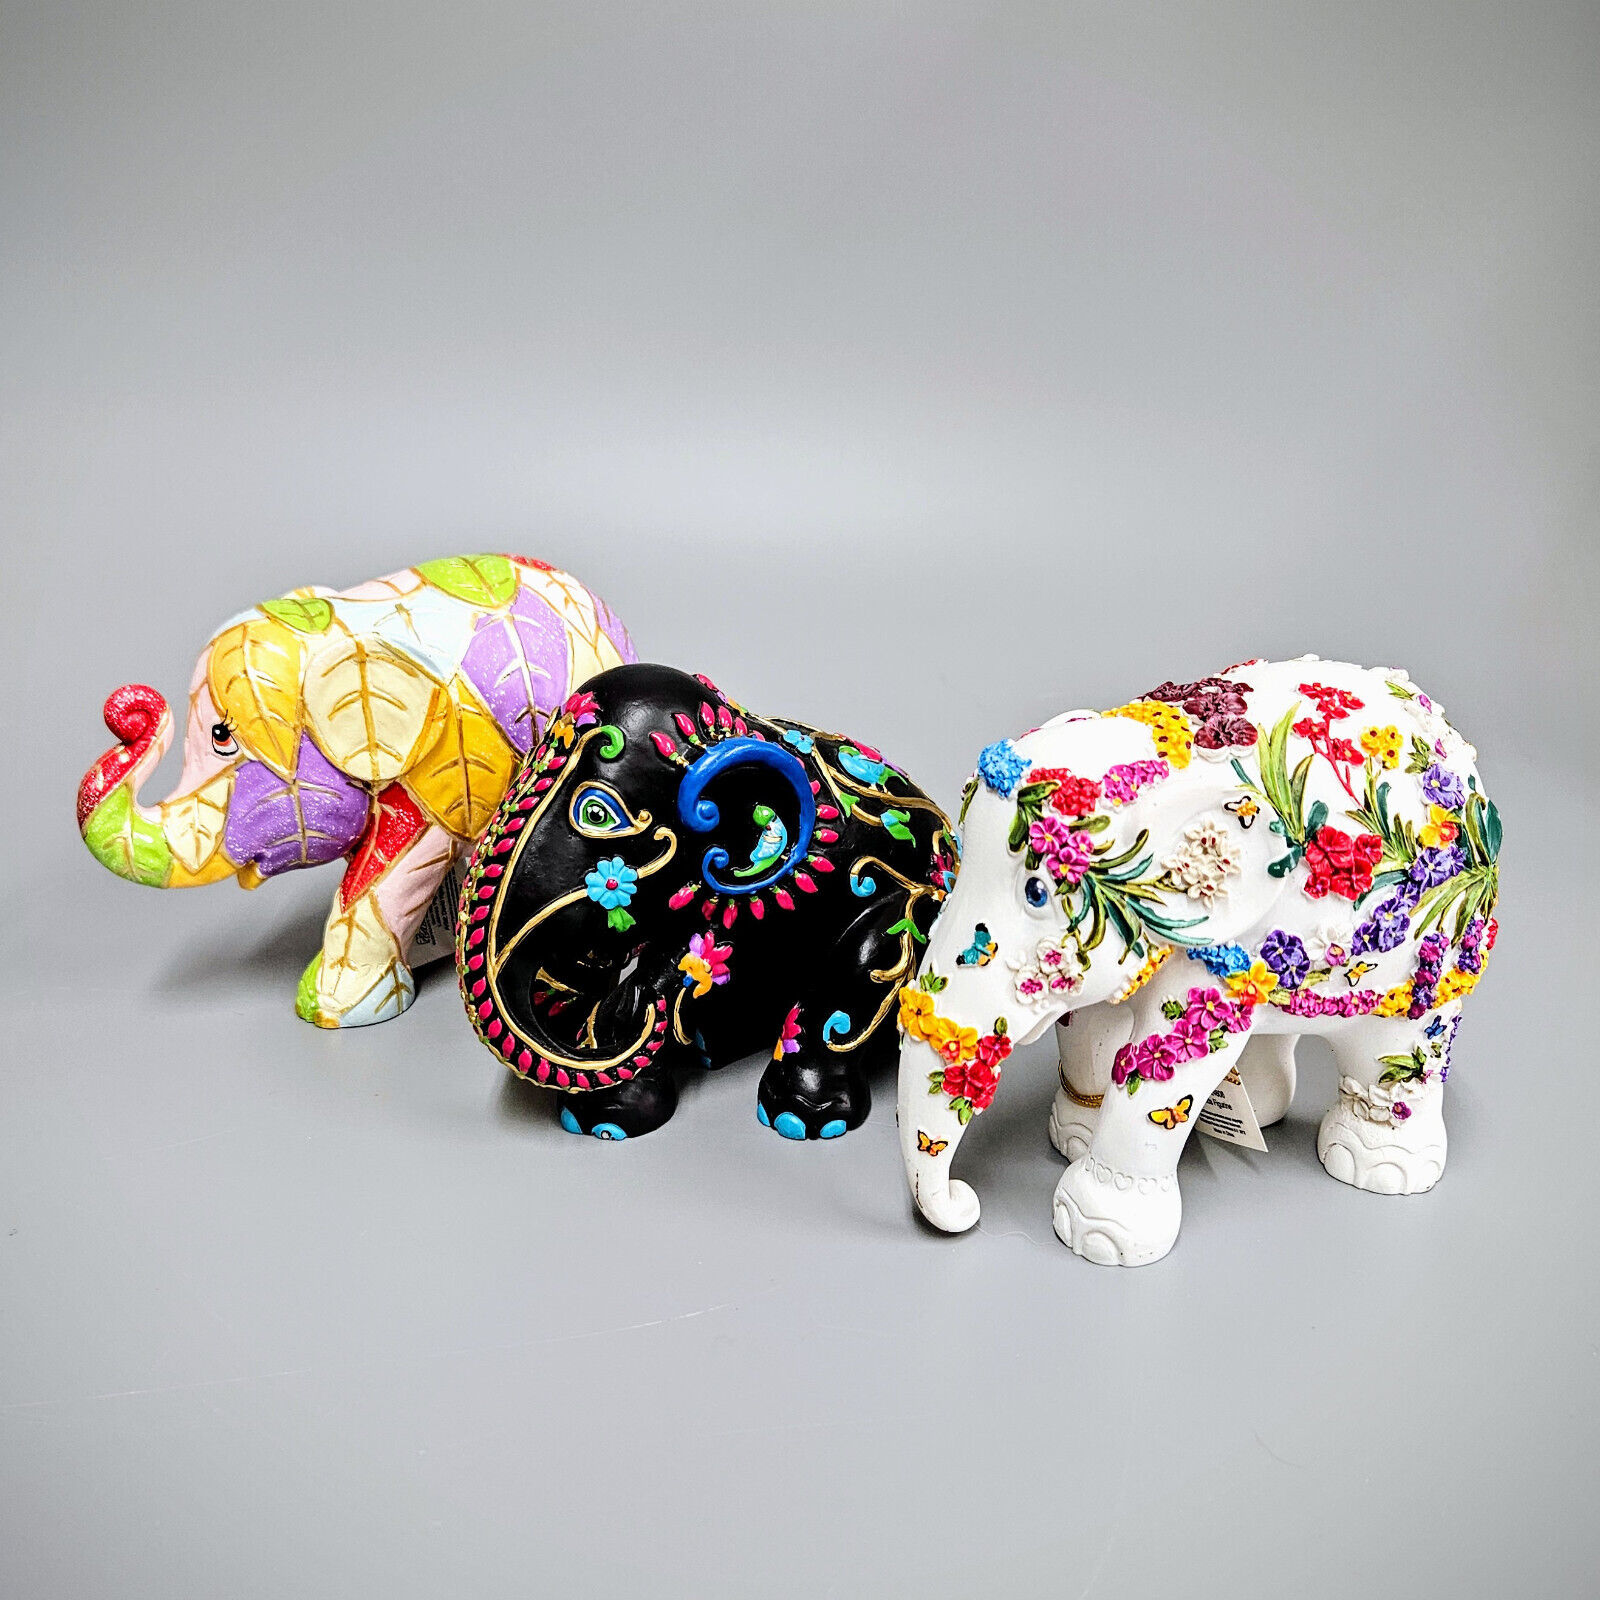 Elephant Parade Westland Giftware SET of 3 - Limited Edition - Hand Numbered